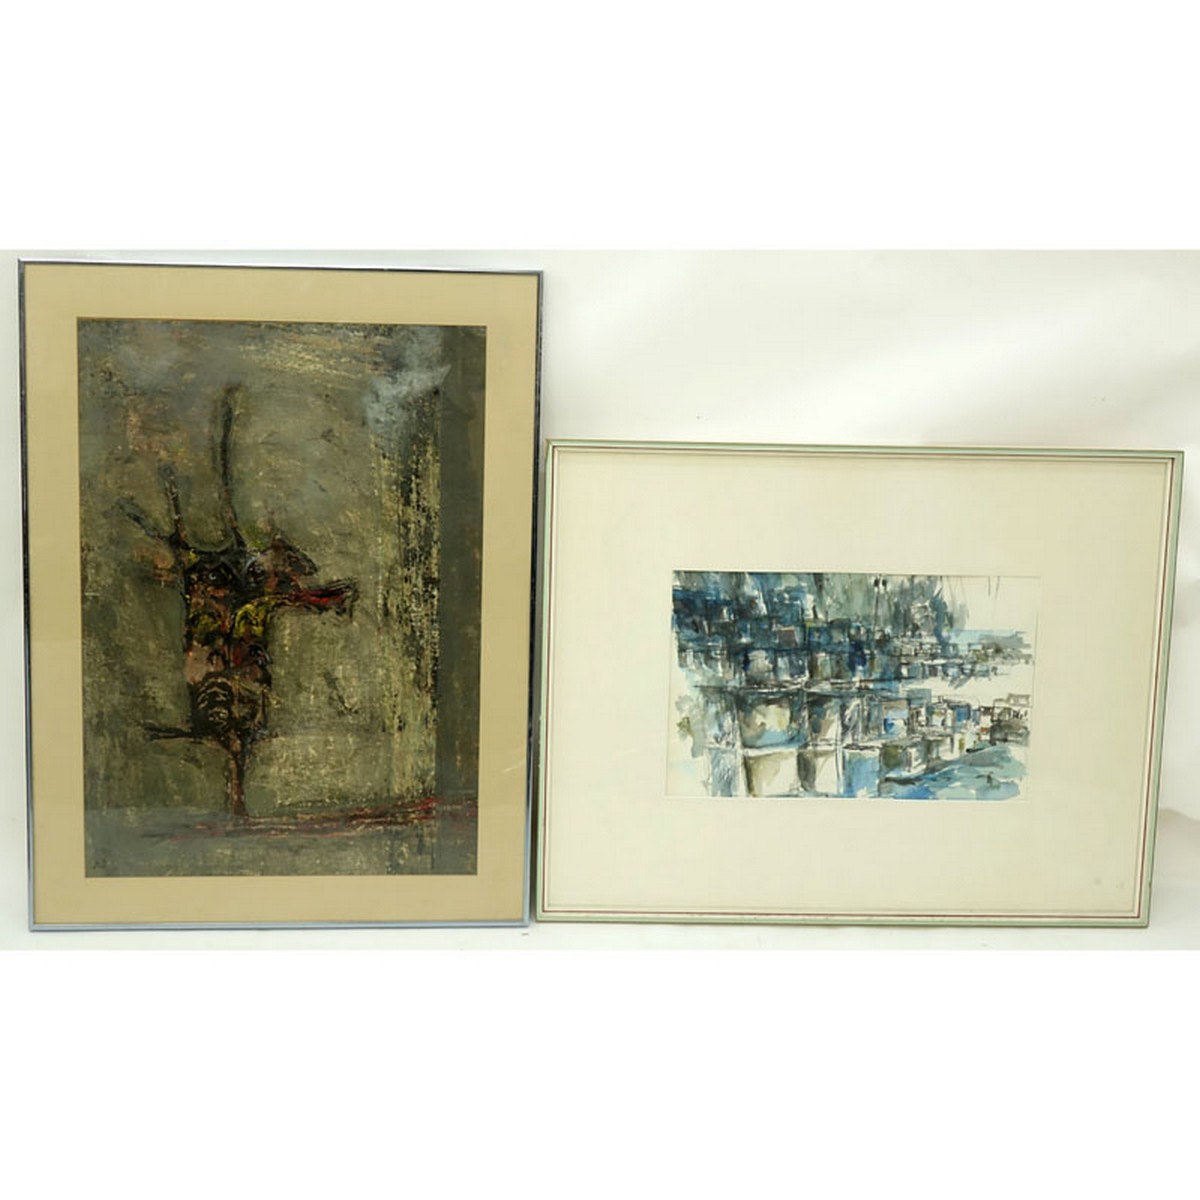 Grouping of Two (2) Mixed Media Abstract Compositions on Paper, Unsigned. One artwork has a tear to top right corner and creasing to paper otherwise good condition.